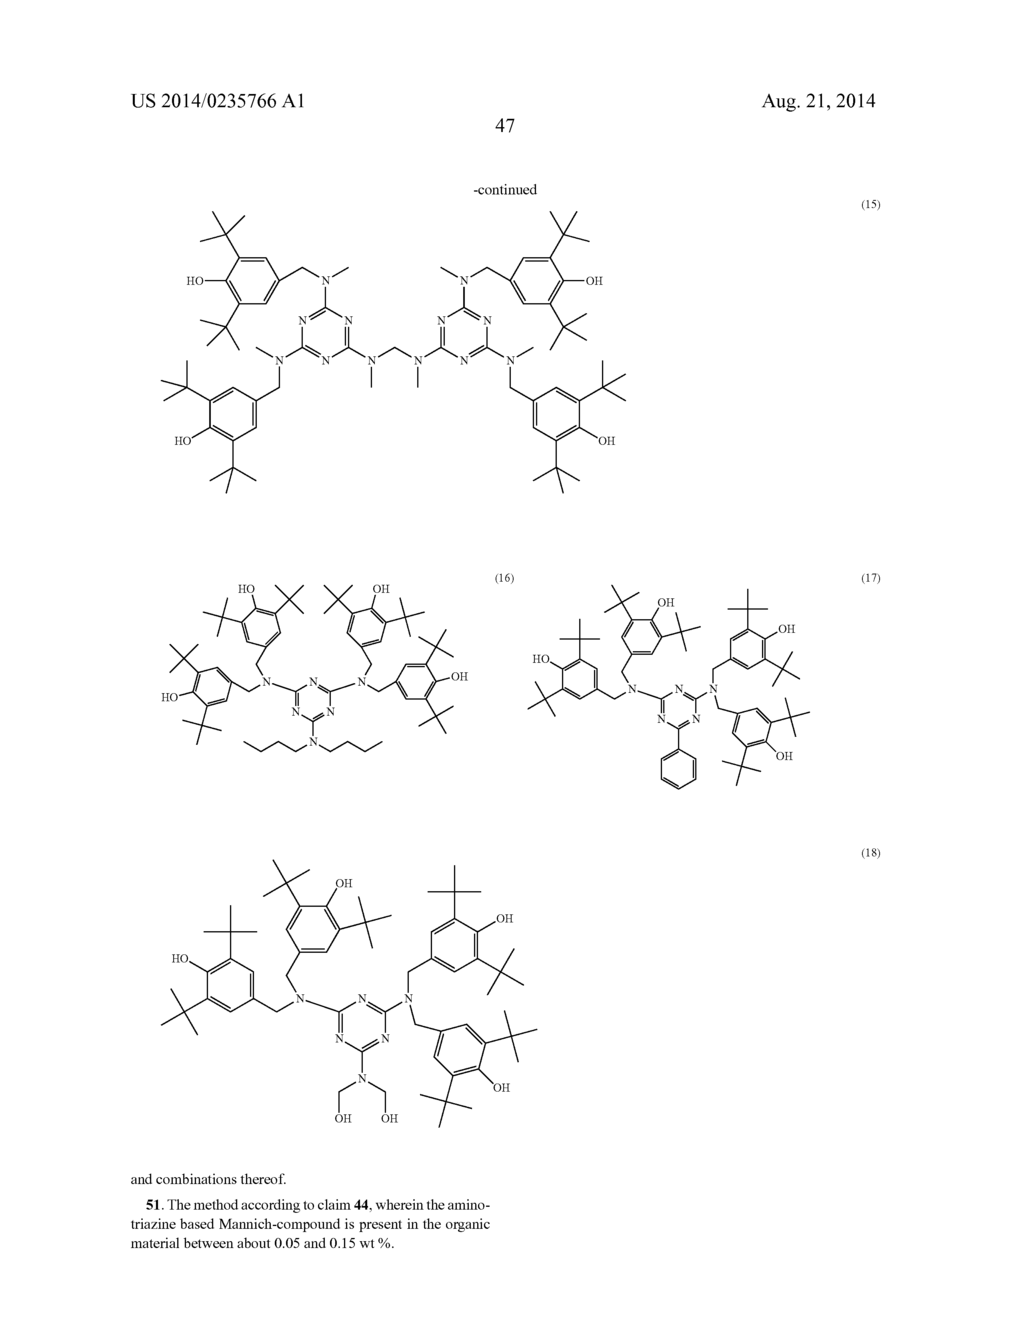 Stabilizing of Organic Material with Amino-Triazine Based     Mannich-Compounds - diagram, schematic, and image 49